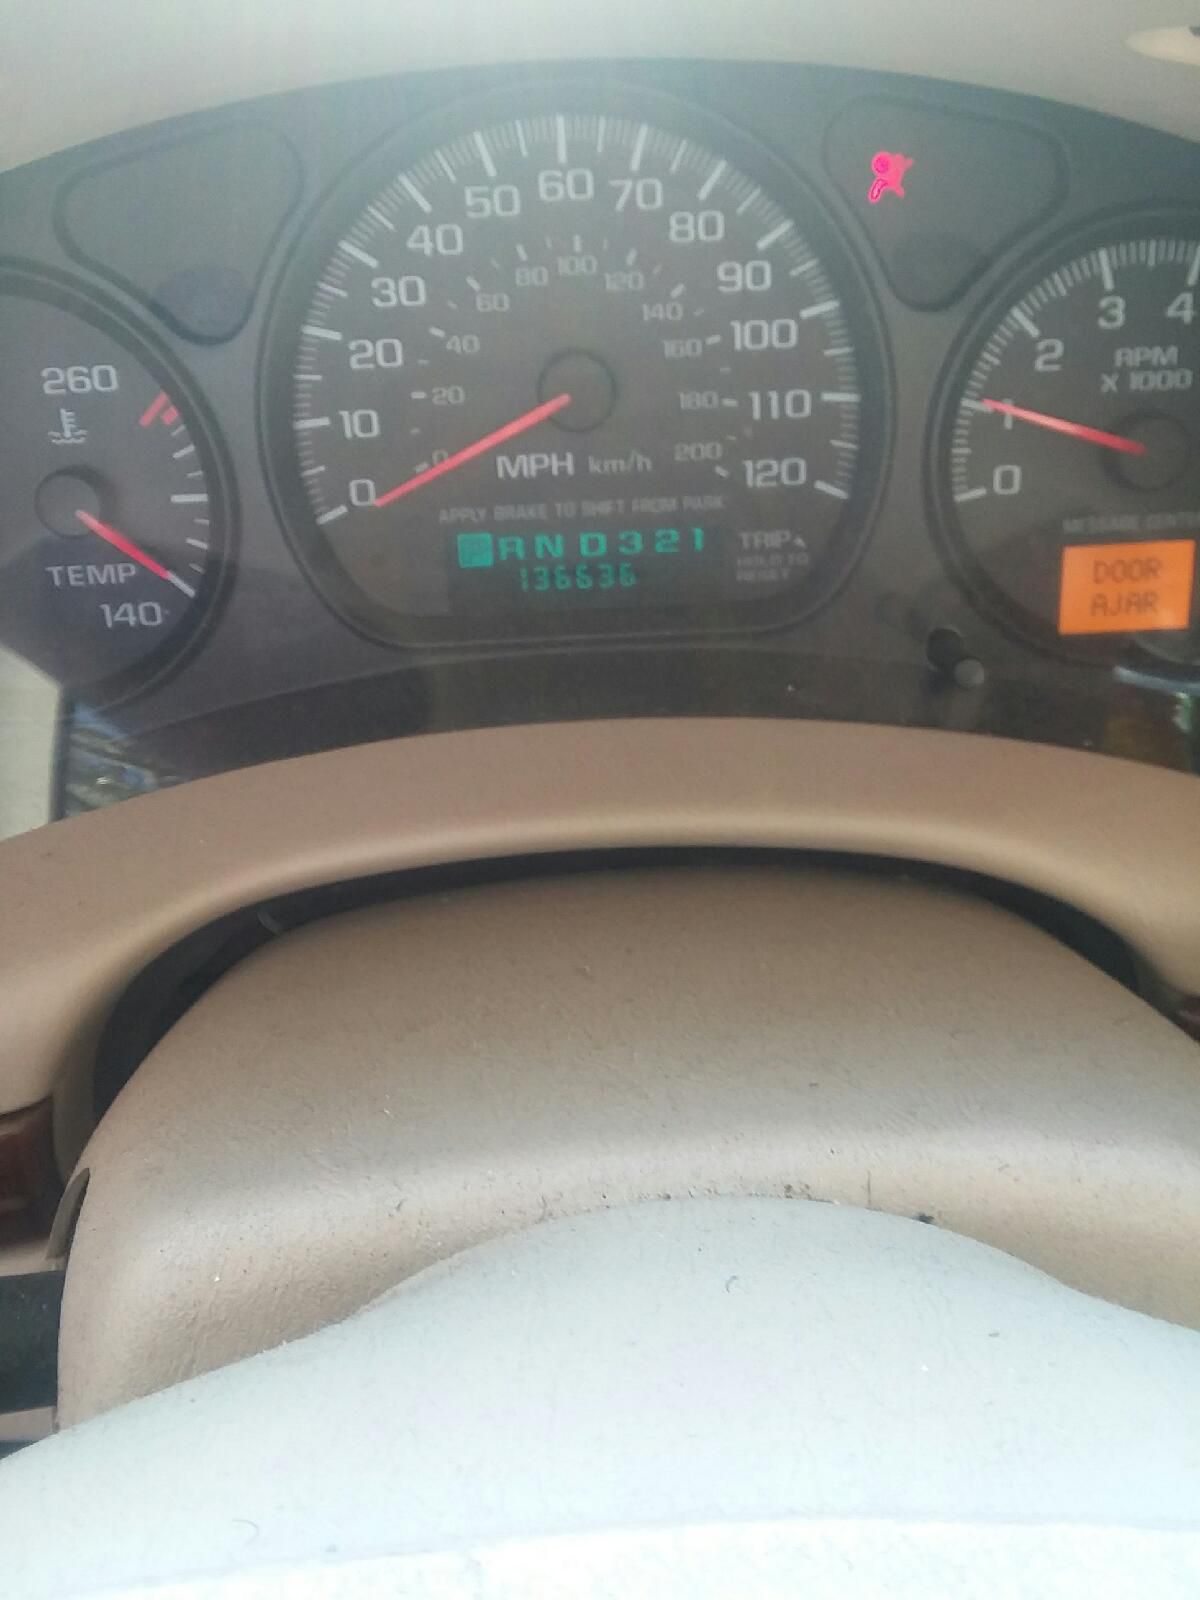 2003 impala white on white 137000 miles good condition {contact info removed}